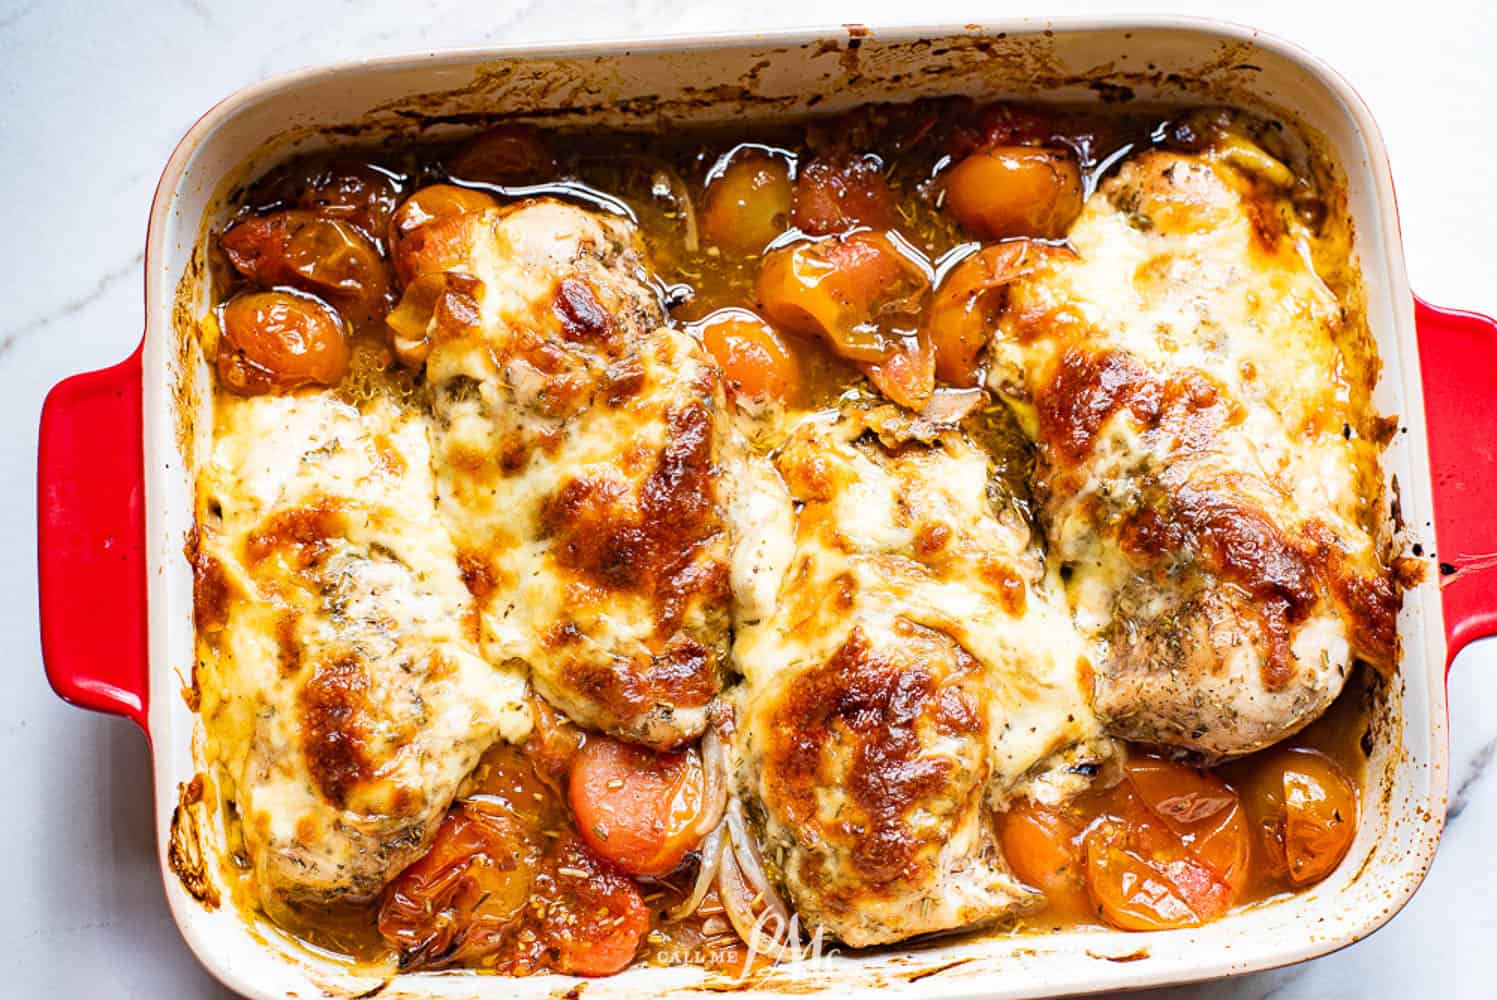 Chicken breasts are covered in cheese in a casserole dish.